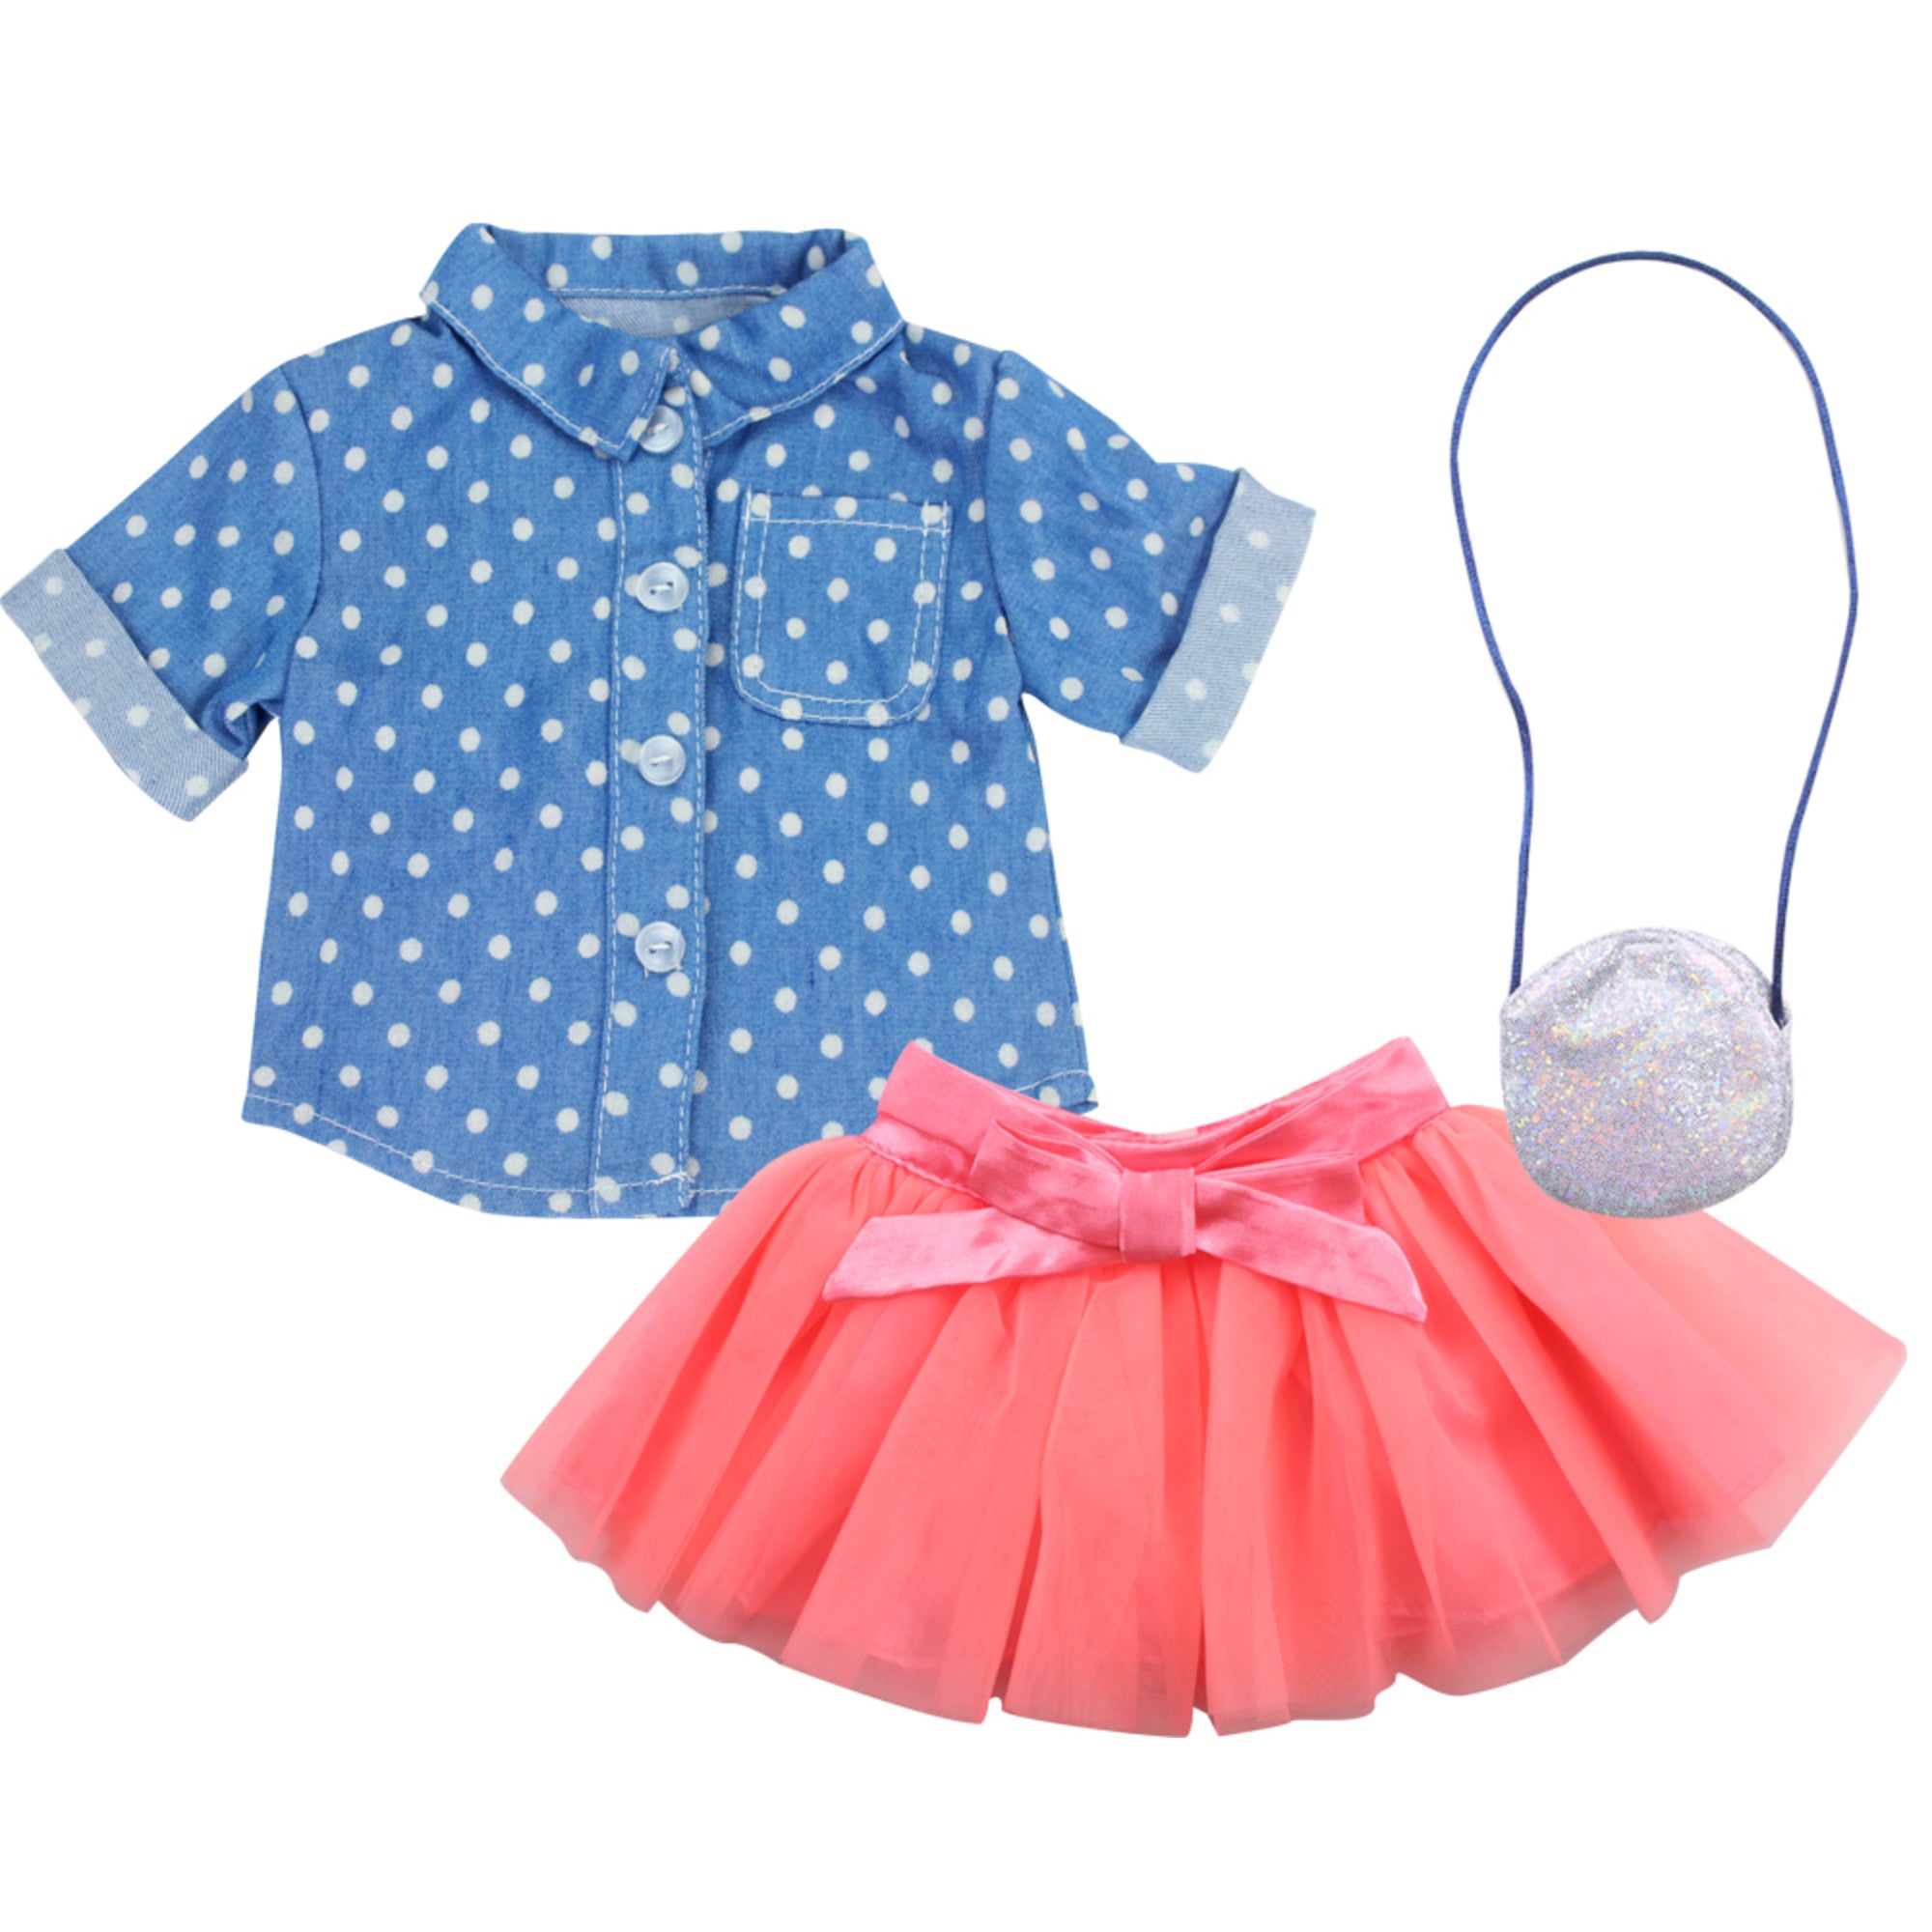 Sophia’s Complete 3-Piece Denim Polka Dot Shirt, Short Ball Skirt, & Sparkly Round Purse Outfit Set for 18” Dolls, Blue/Pink